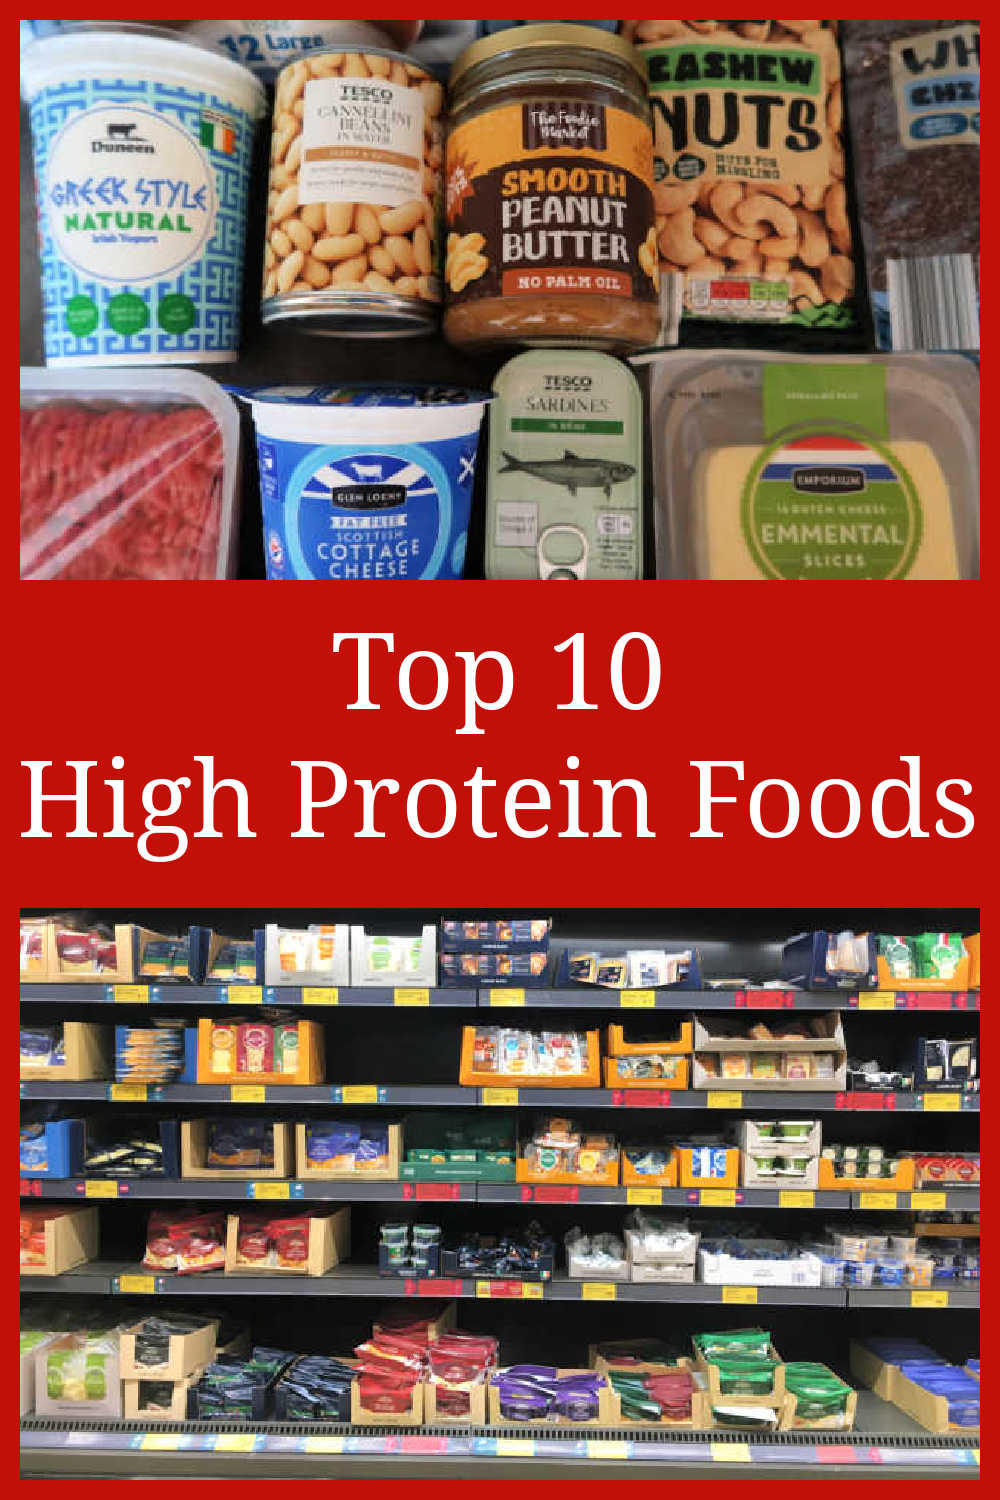 Top 10 High Protein Foods - The best high-protein rich food items to include more of in your diet everyday - with a video of some of the highest protein foods.